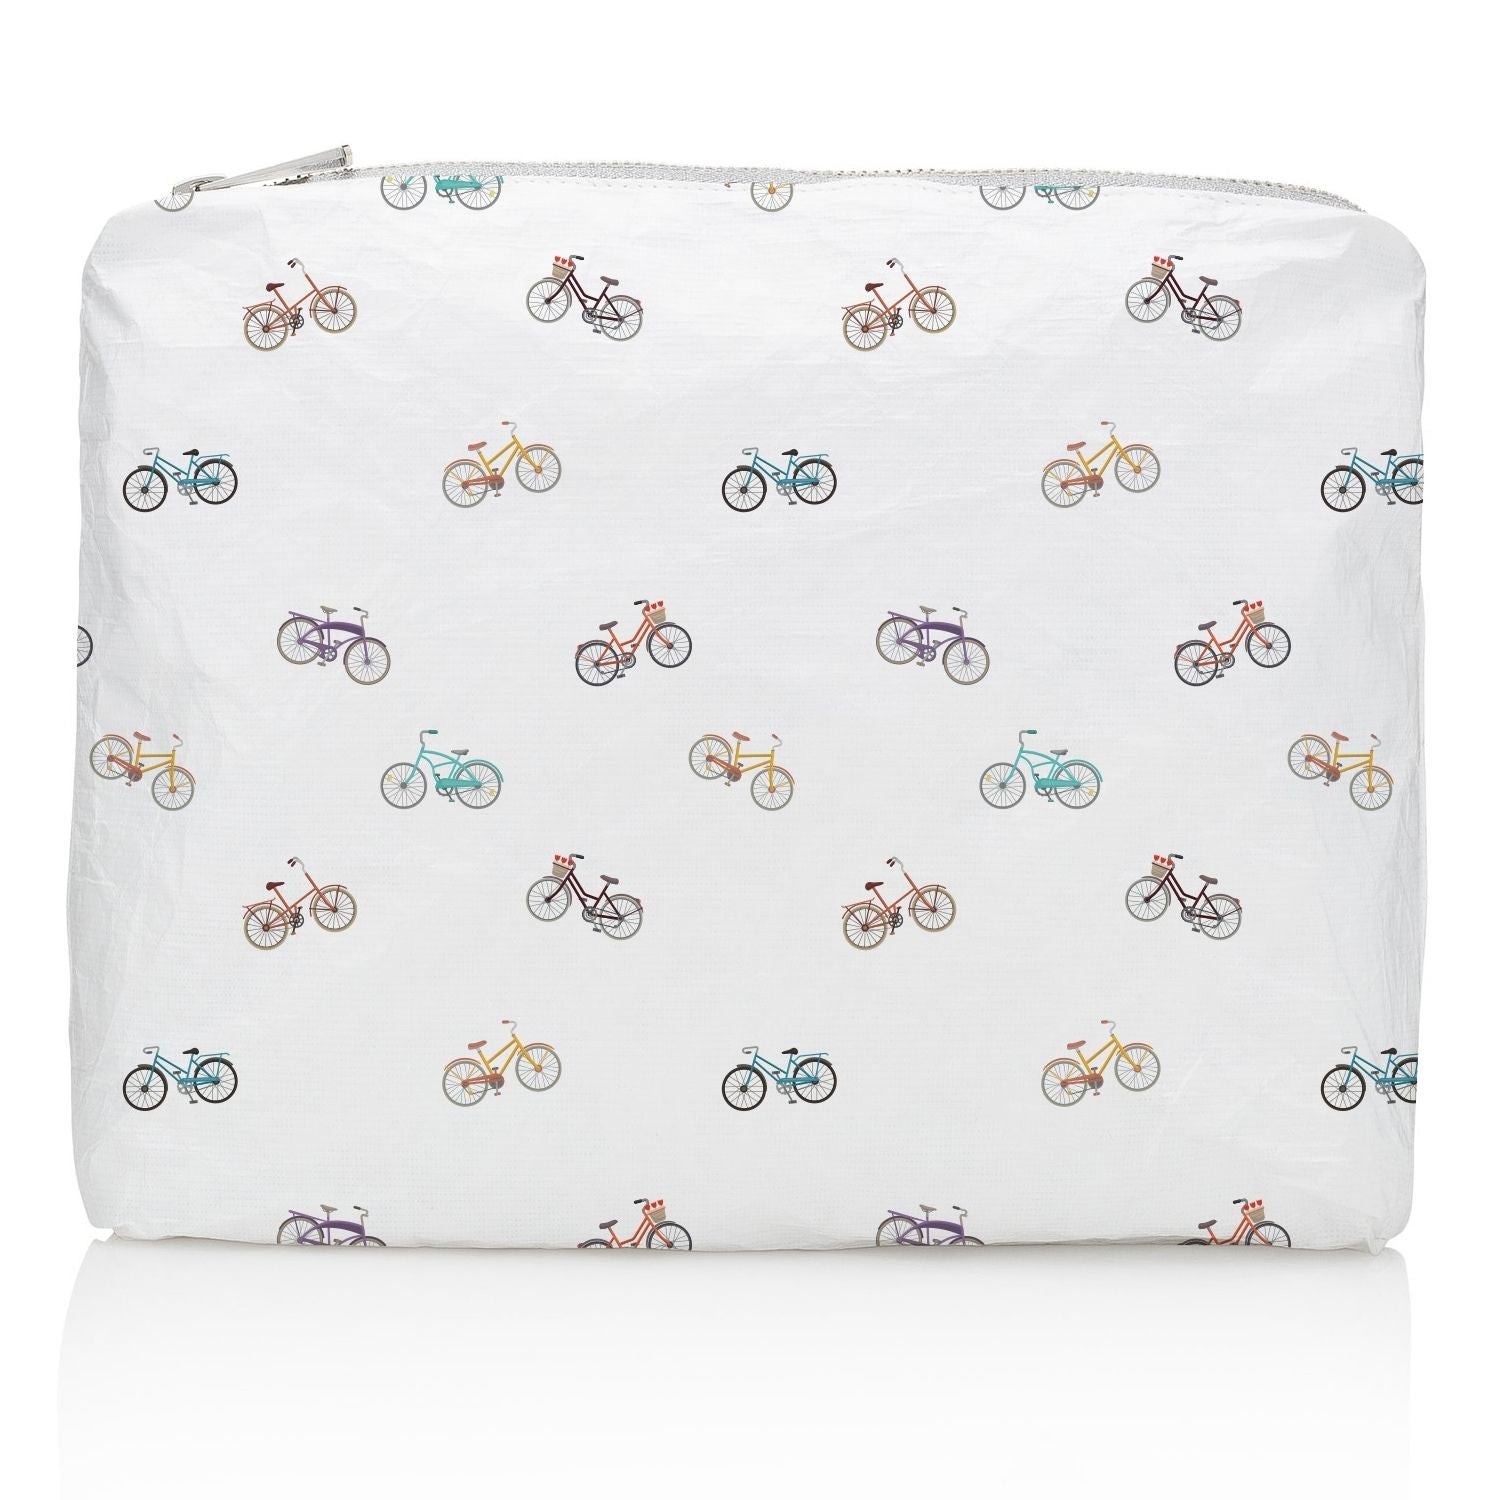 Medium zipper pouch in white with colorful bicycles pattern